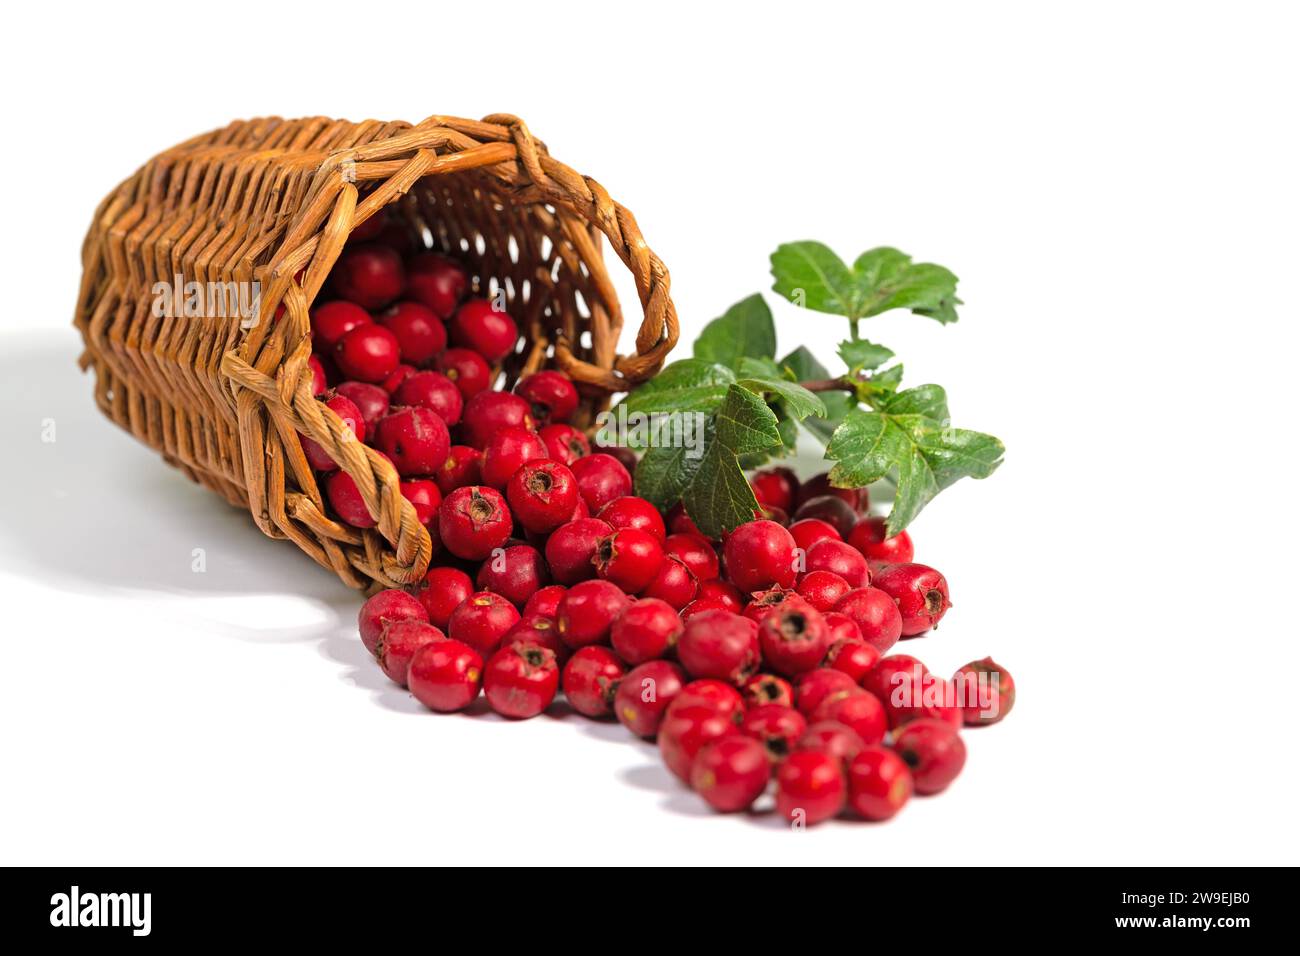 Dried hawthorn berries against white background Stock Photo